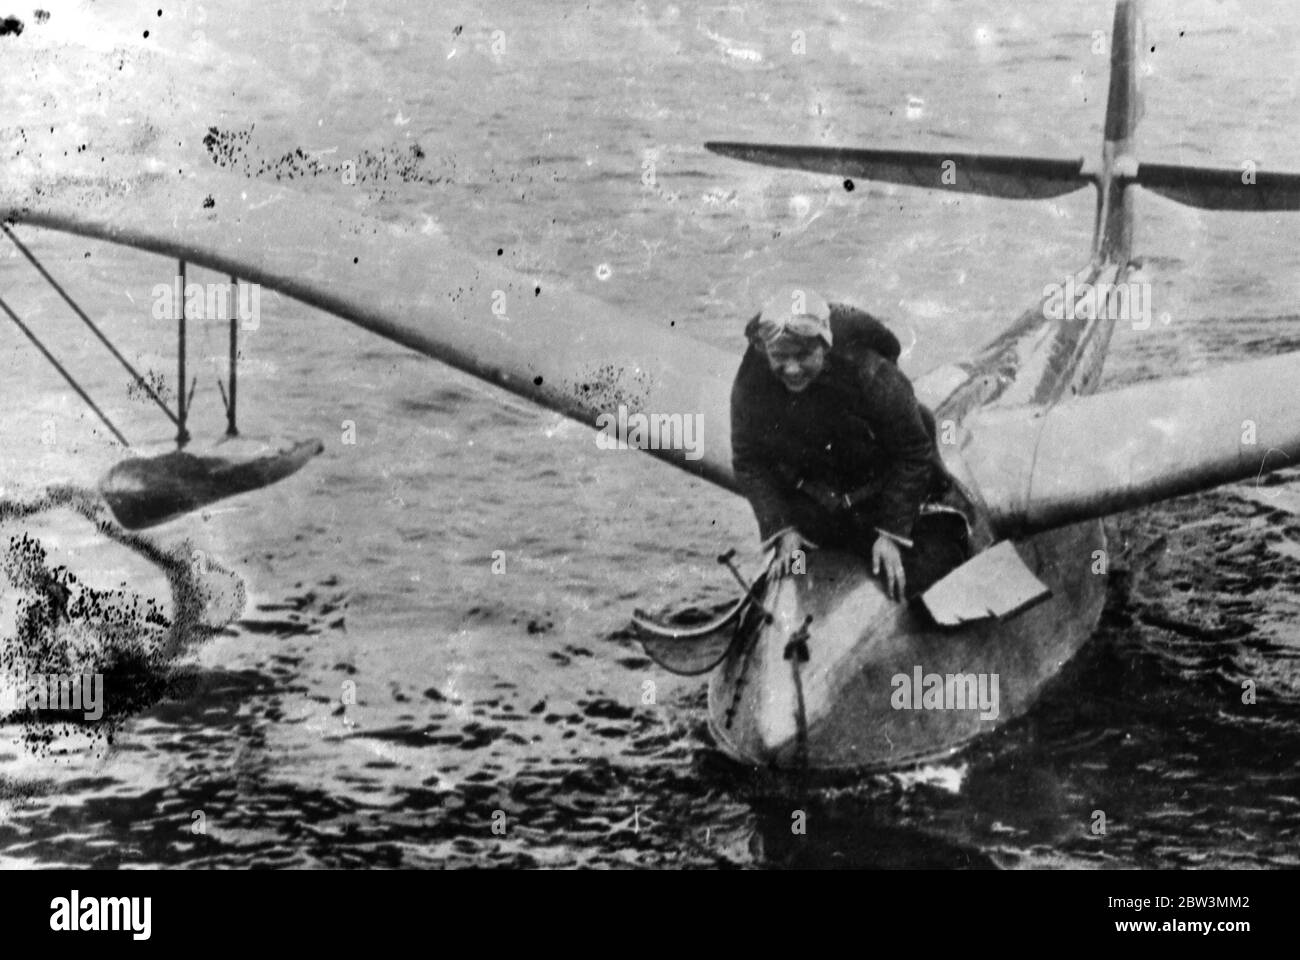 German woman pilot demonstrates new sea glider . A new type of sea glider was demonstrated by Miss Reitach , a German woman pilot on the Bodensea . The demonstration was watched by experts of the German Sail plane investigation institute . Hanna Reitsch was towed into the air and remained aloft for 30 minutes , after which she made a perfect ' landing ' on the water . The craft has a wing span of 55 feet . Photo shows Hanna Reitch aboard the new sea glider after the test . 30 November 1935 Stock Photo